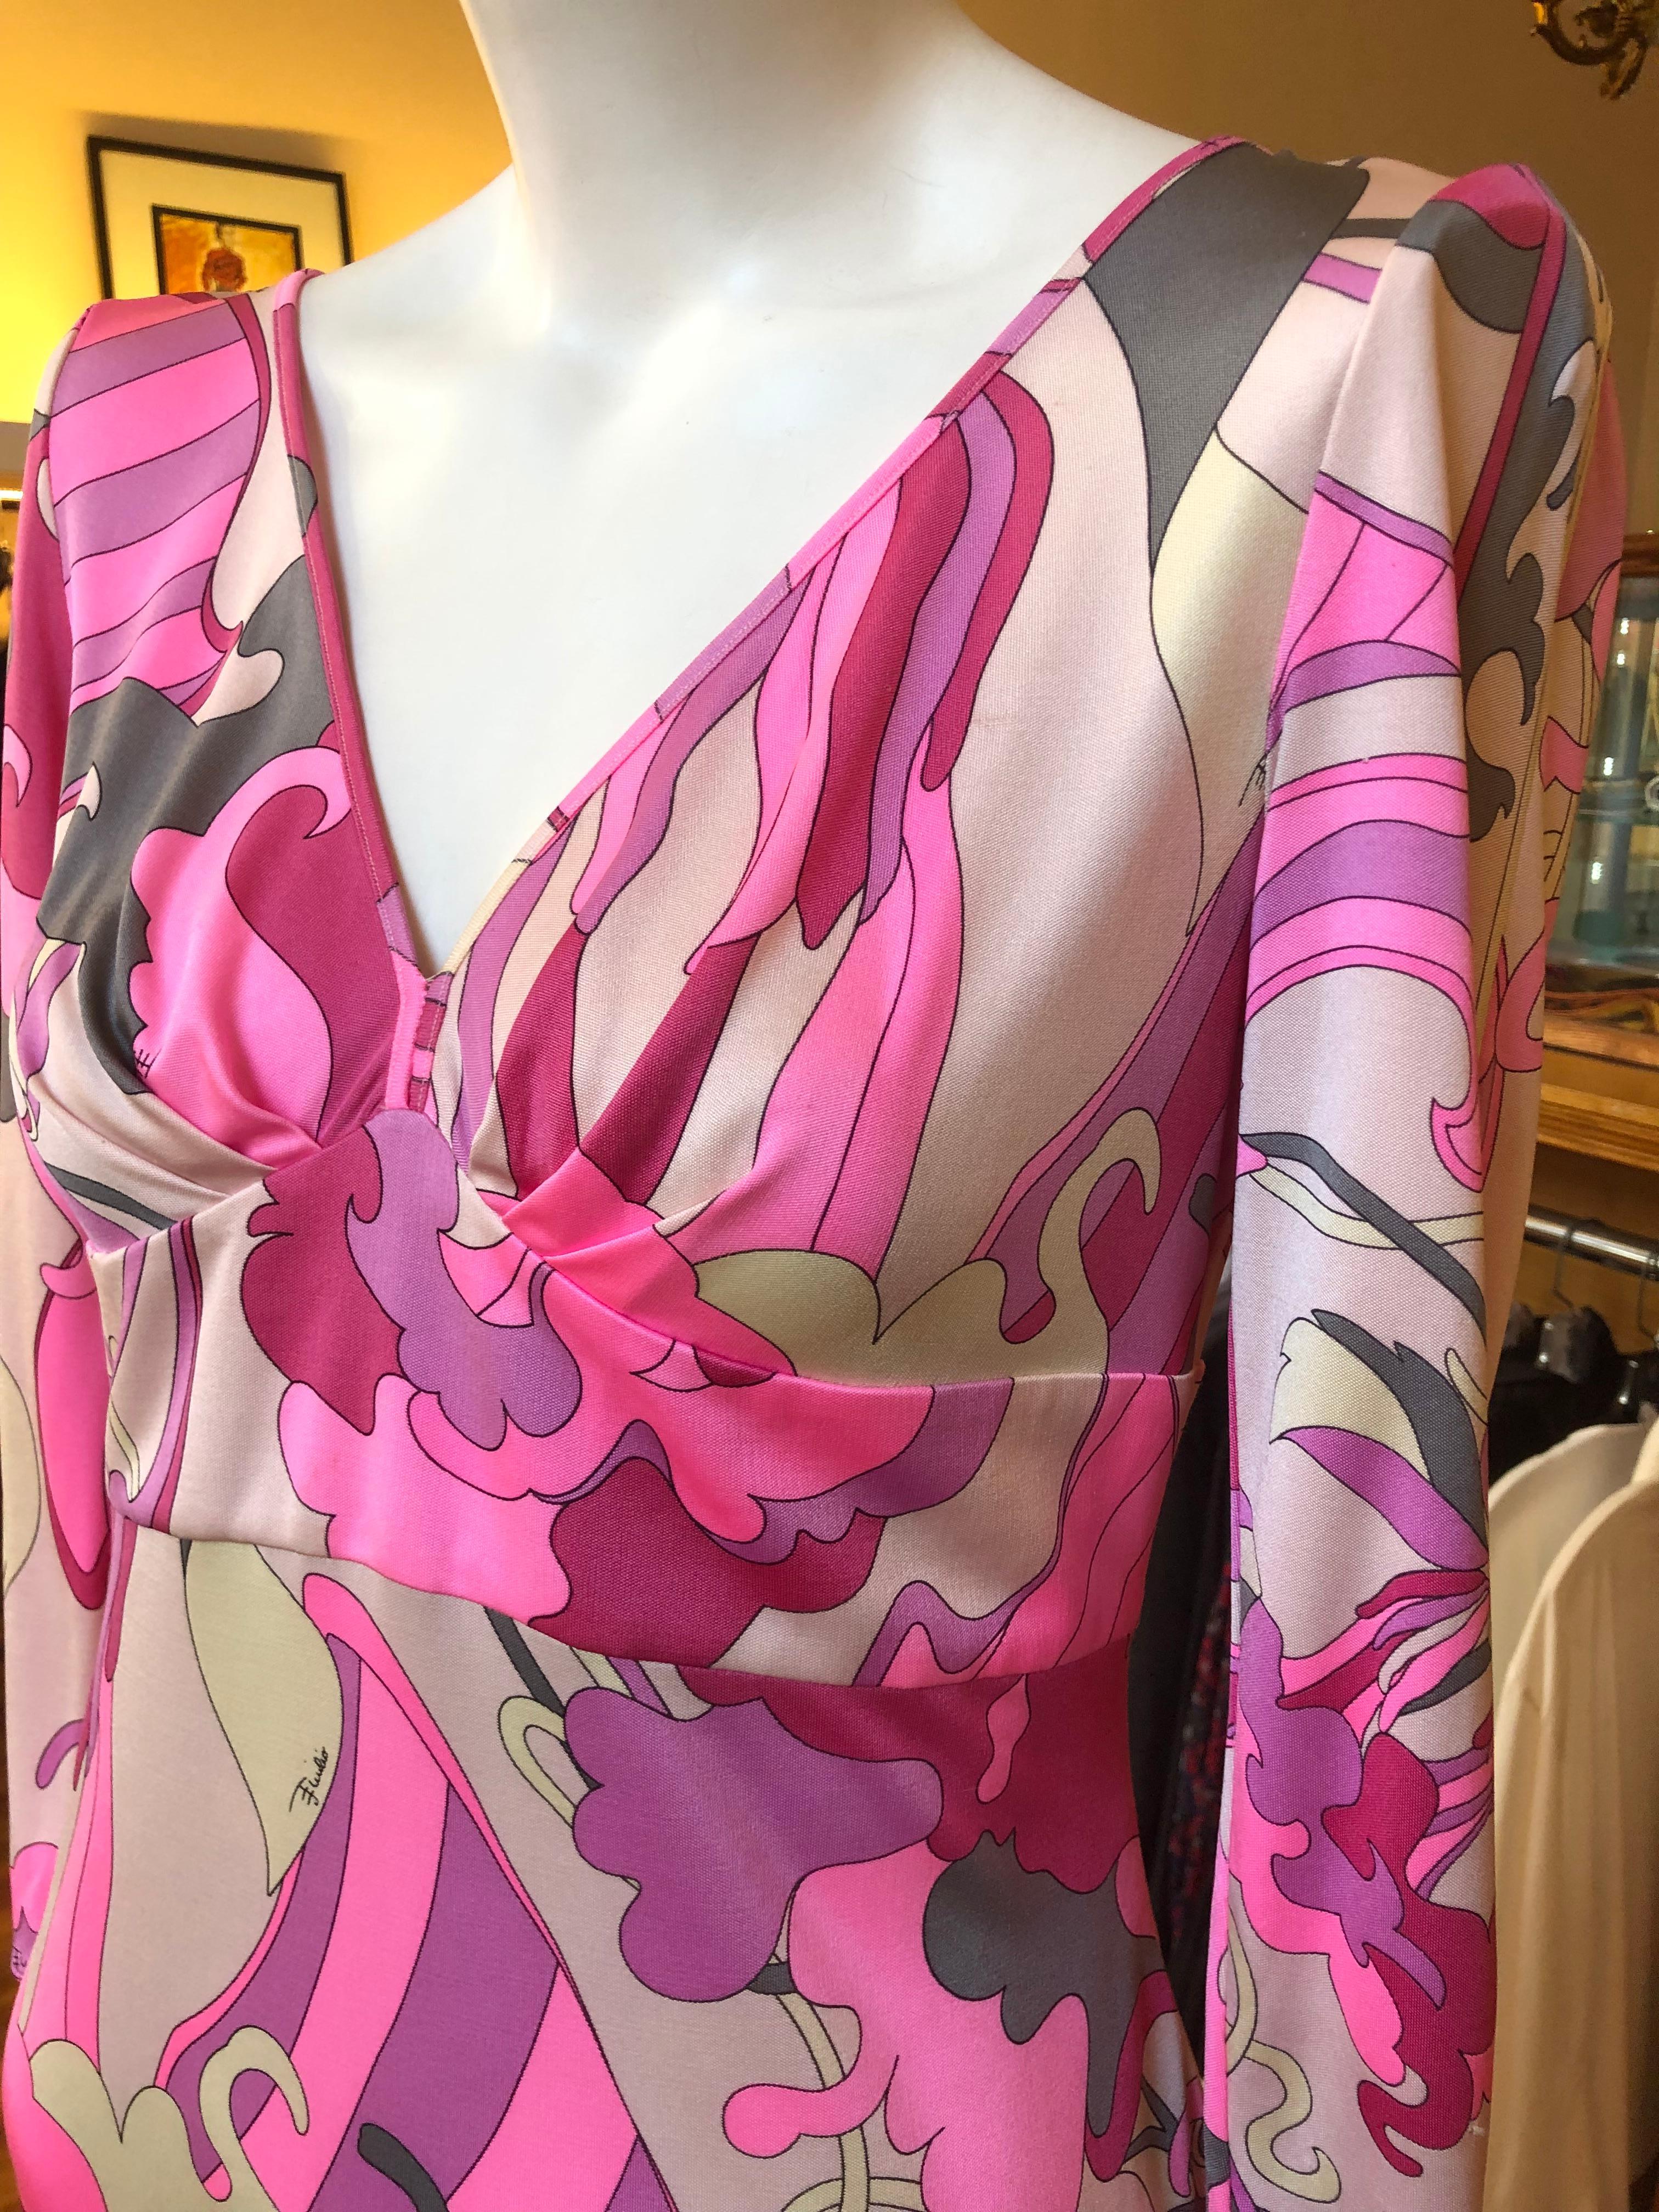 Purple Emilio Pucci Silk Floral Print Dress with Low Back (44 ITL)